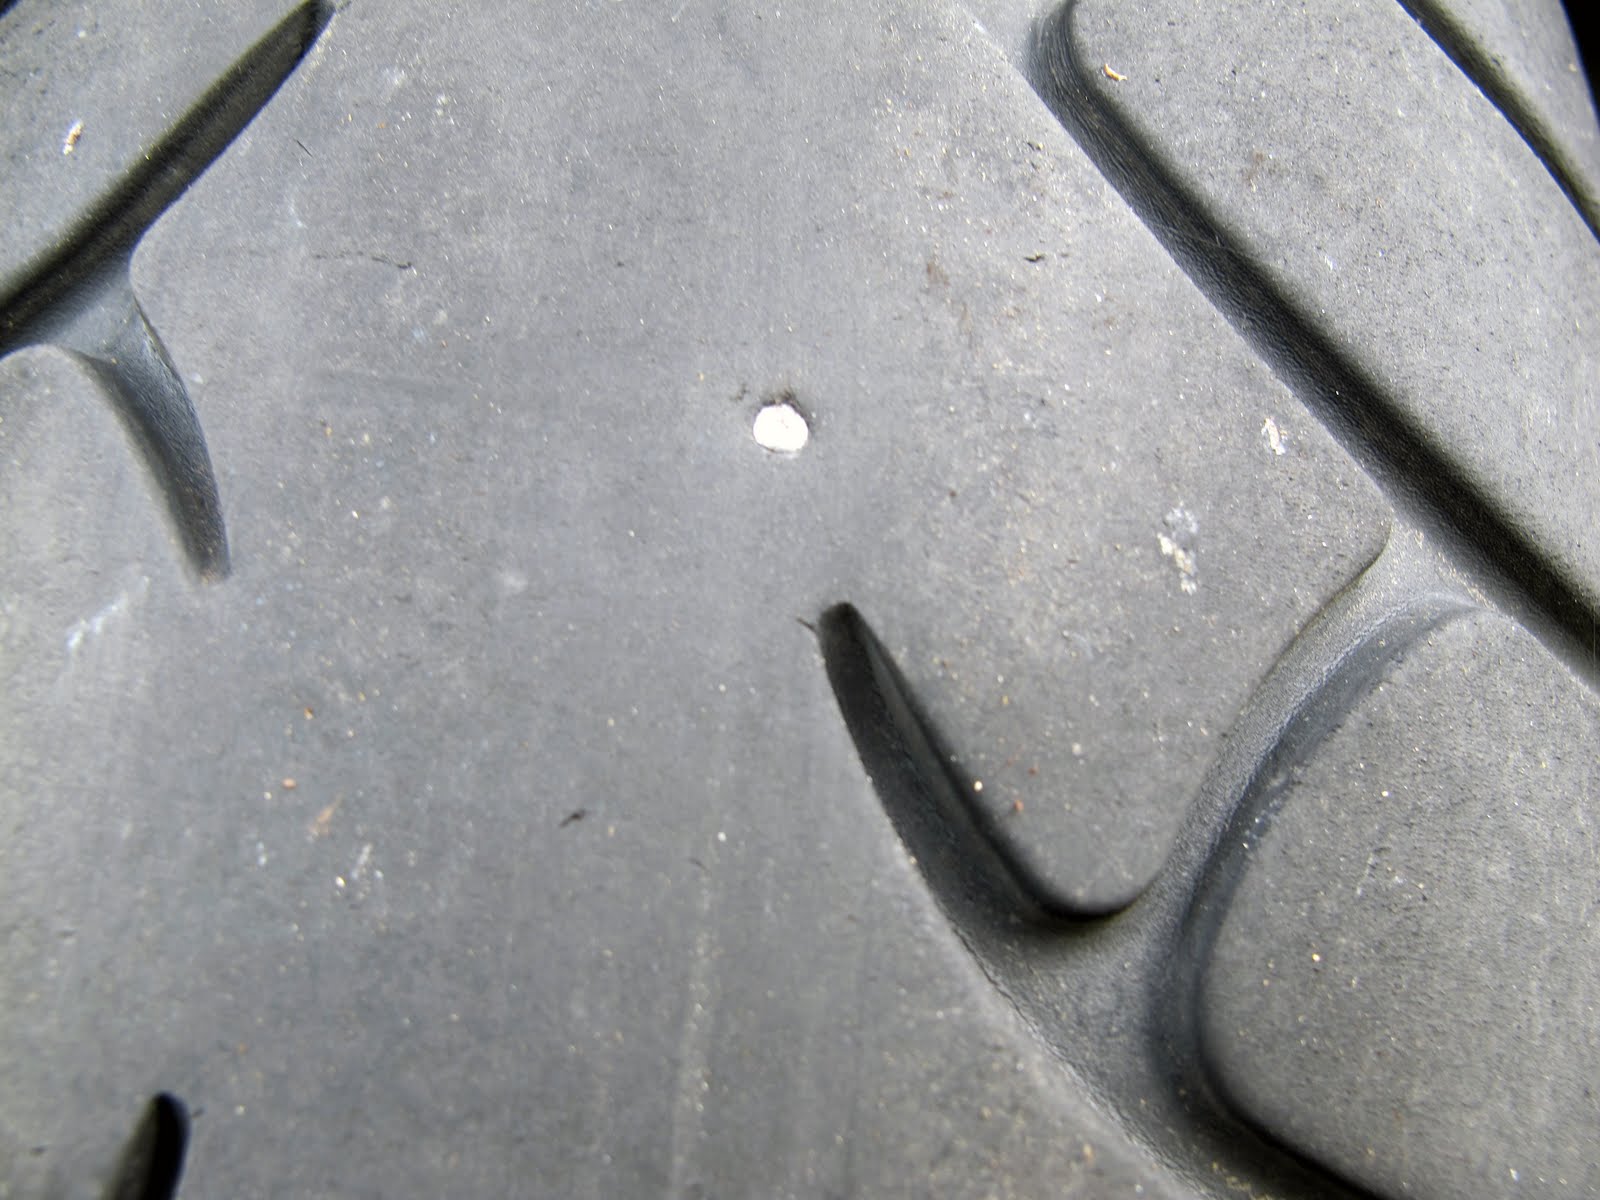 Weirdly enough, I've never had a nail in a motorcycle tire before